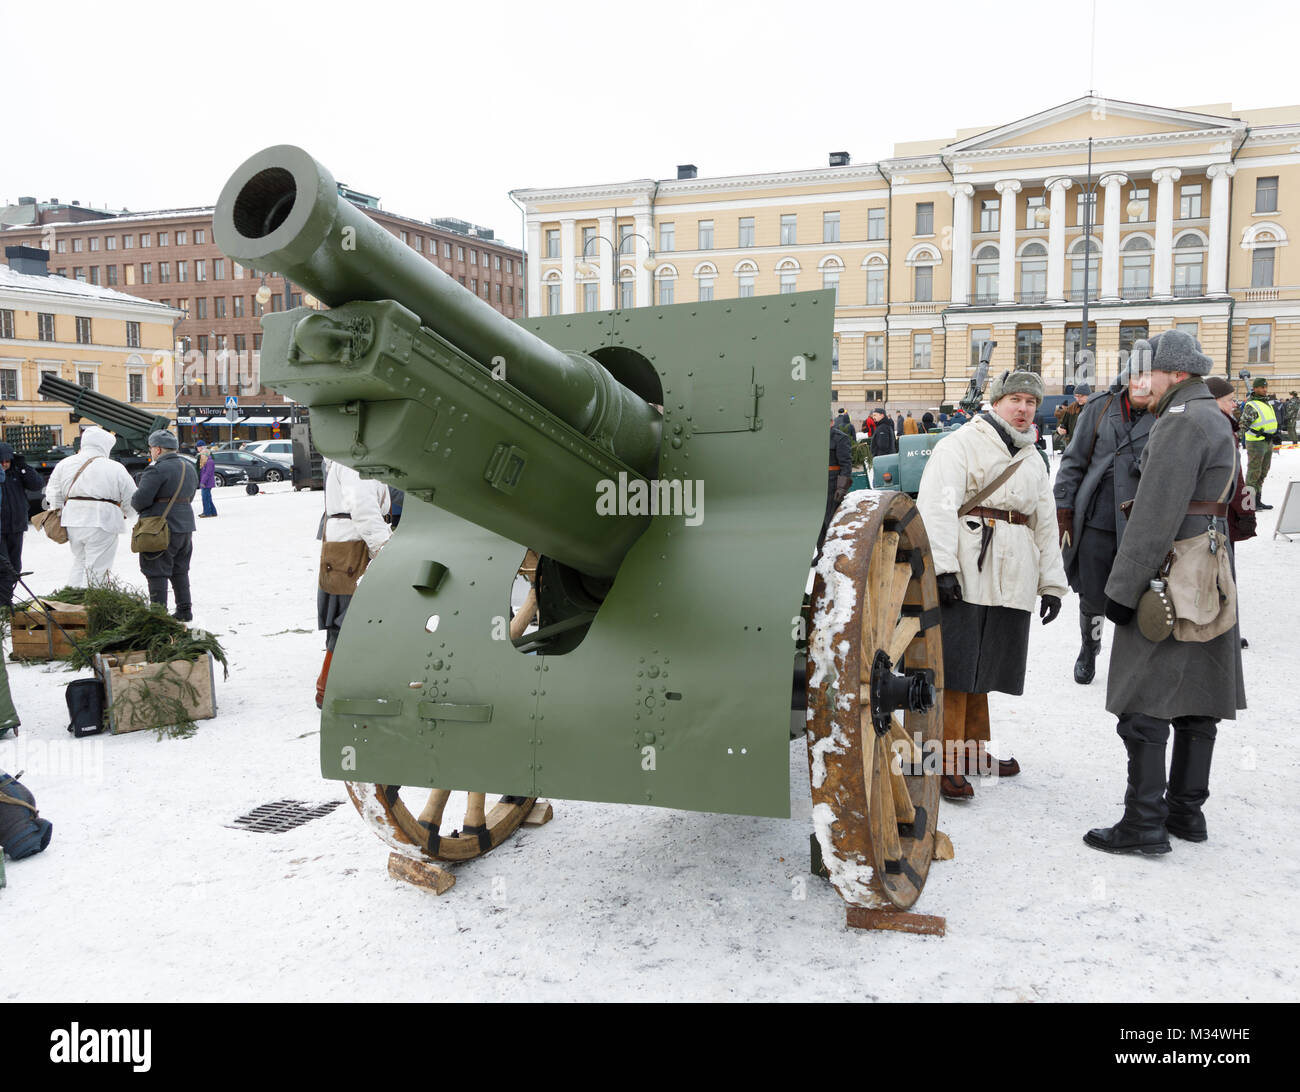 Helsinki, Finland. 8th Feb, 2018. To commemorate the 100 years history of artillery in independent Finland, a public event was arranged at the Senate Square of Helsinki on 9 February 2018. There was a display of present-day equipment, plus a re-enactment of a horse-driven field artillery piece driven into a firing position. The horses as well as the firing crew are wearing white snow camouflage, as in the days of the Winter War 1939-40. Credit: Hannu Mononen/Alamy Live News Stock Photo